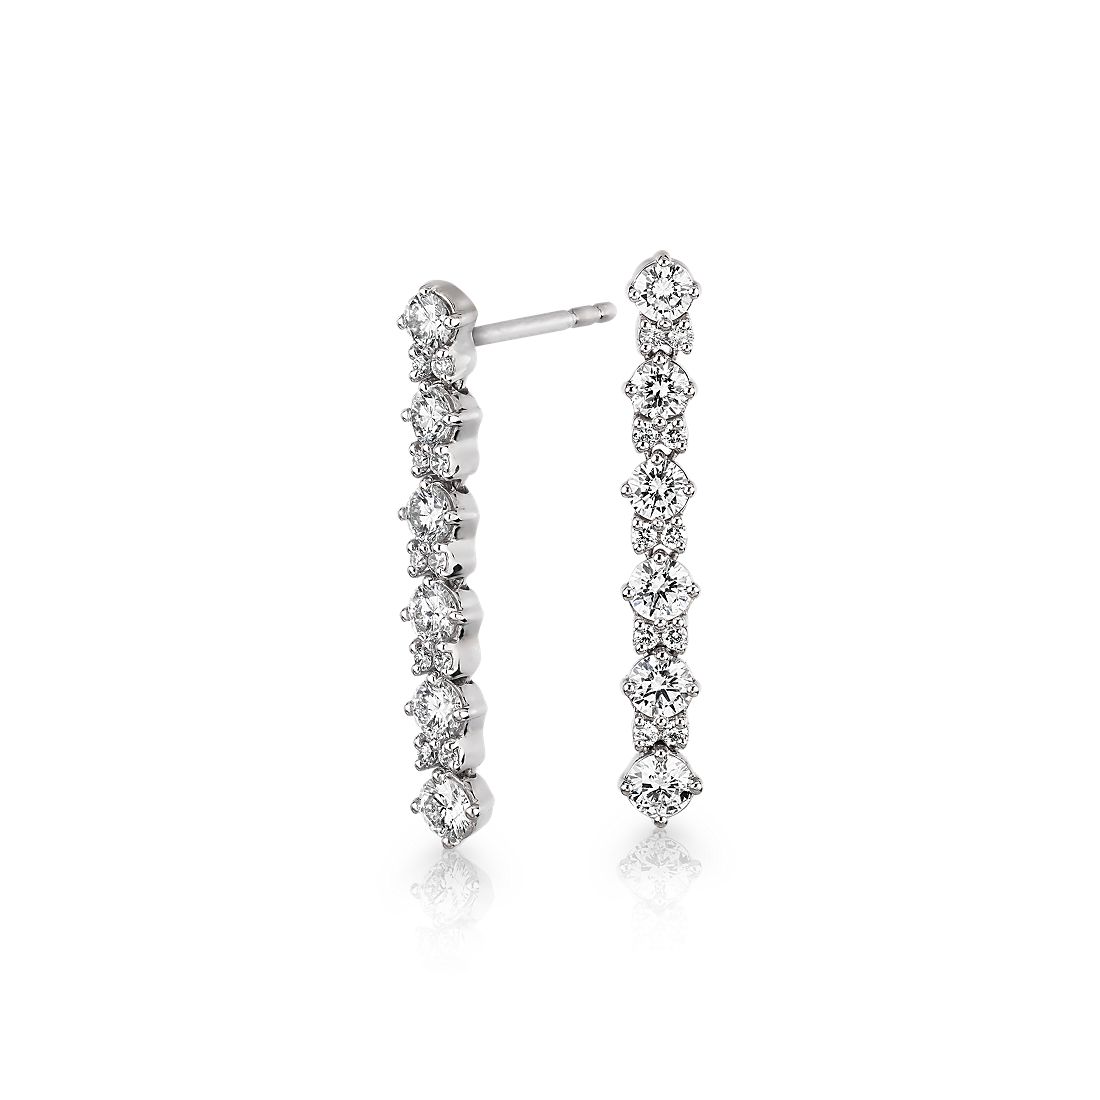 Monique Lhuillier Diamond Round Linear Drop Earrings in 18k White Gold (1 ct. tw.)